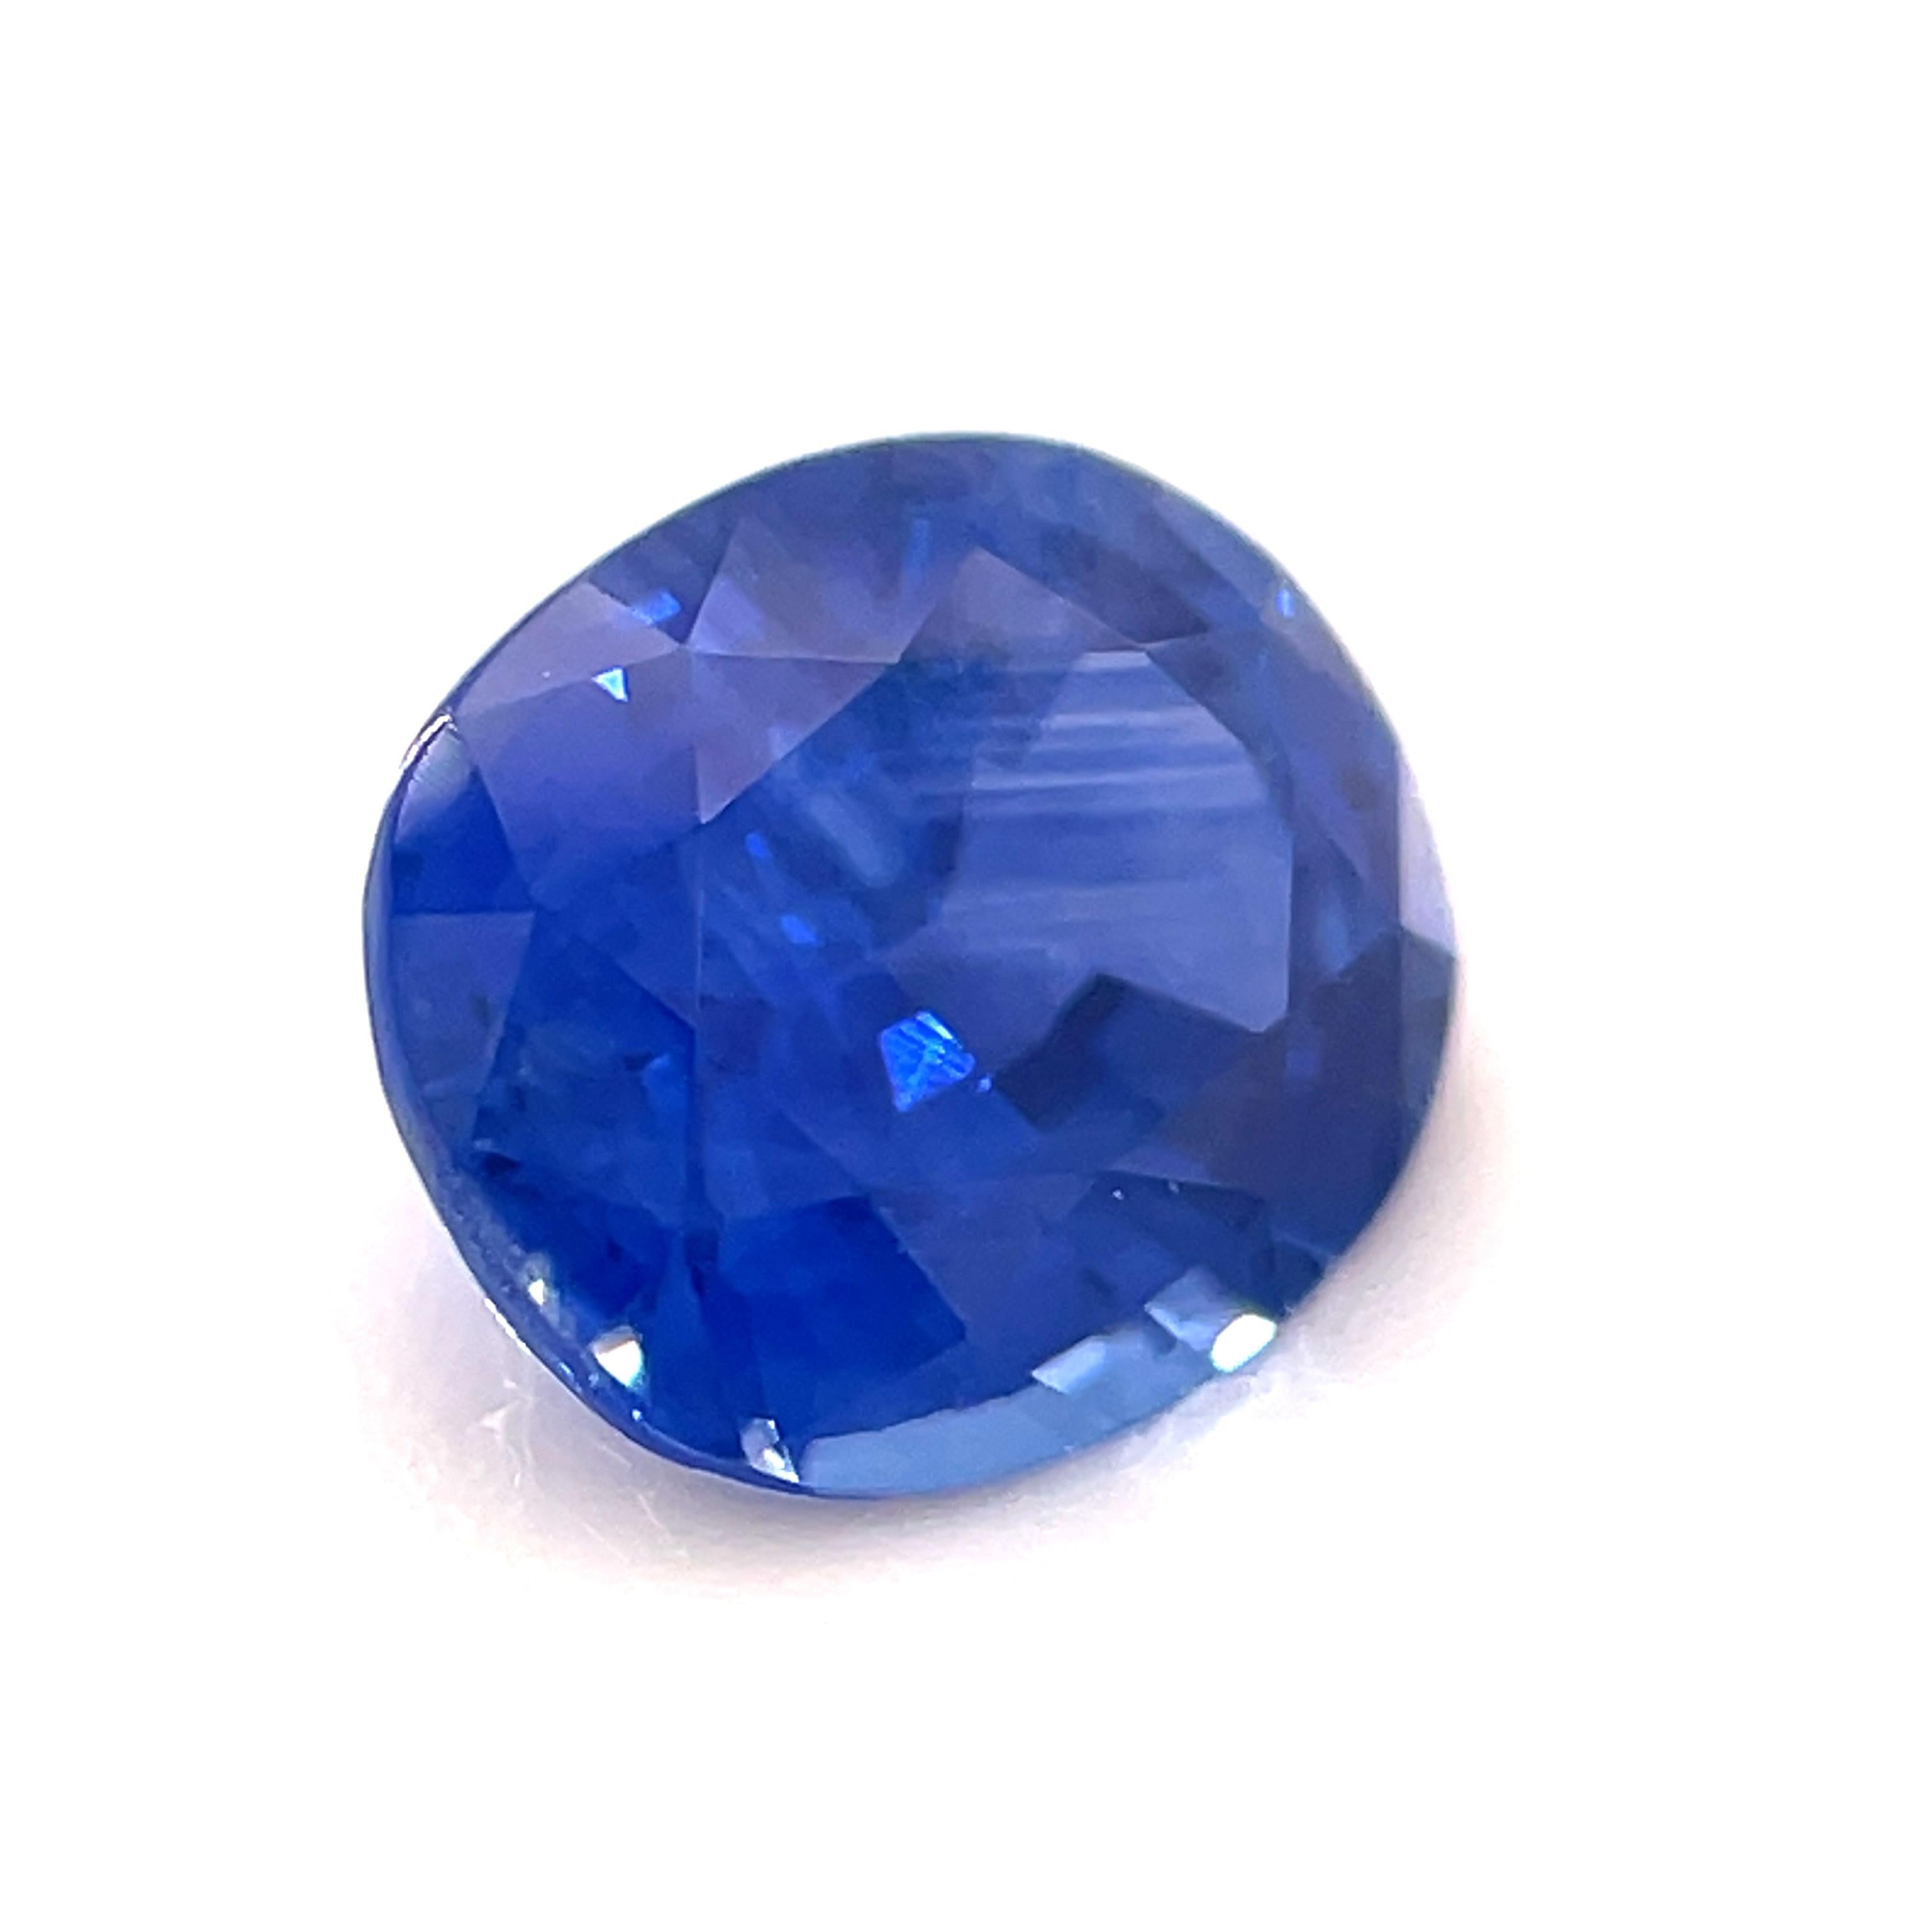 Oval Cut 1.17 Carat Oval Blue Sapphire Loose Unset 3-Stone Engagement Ring Gemstone For Sale